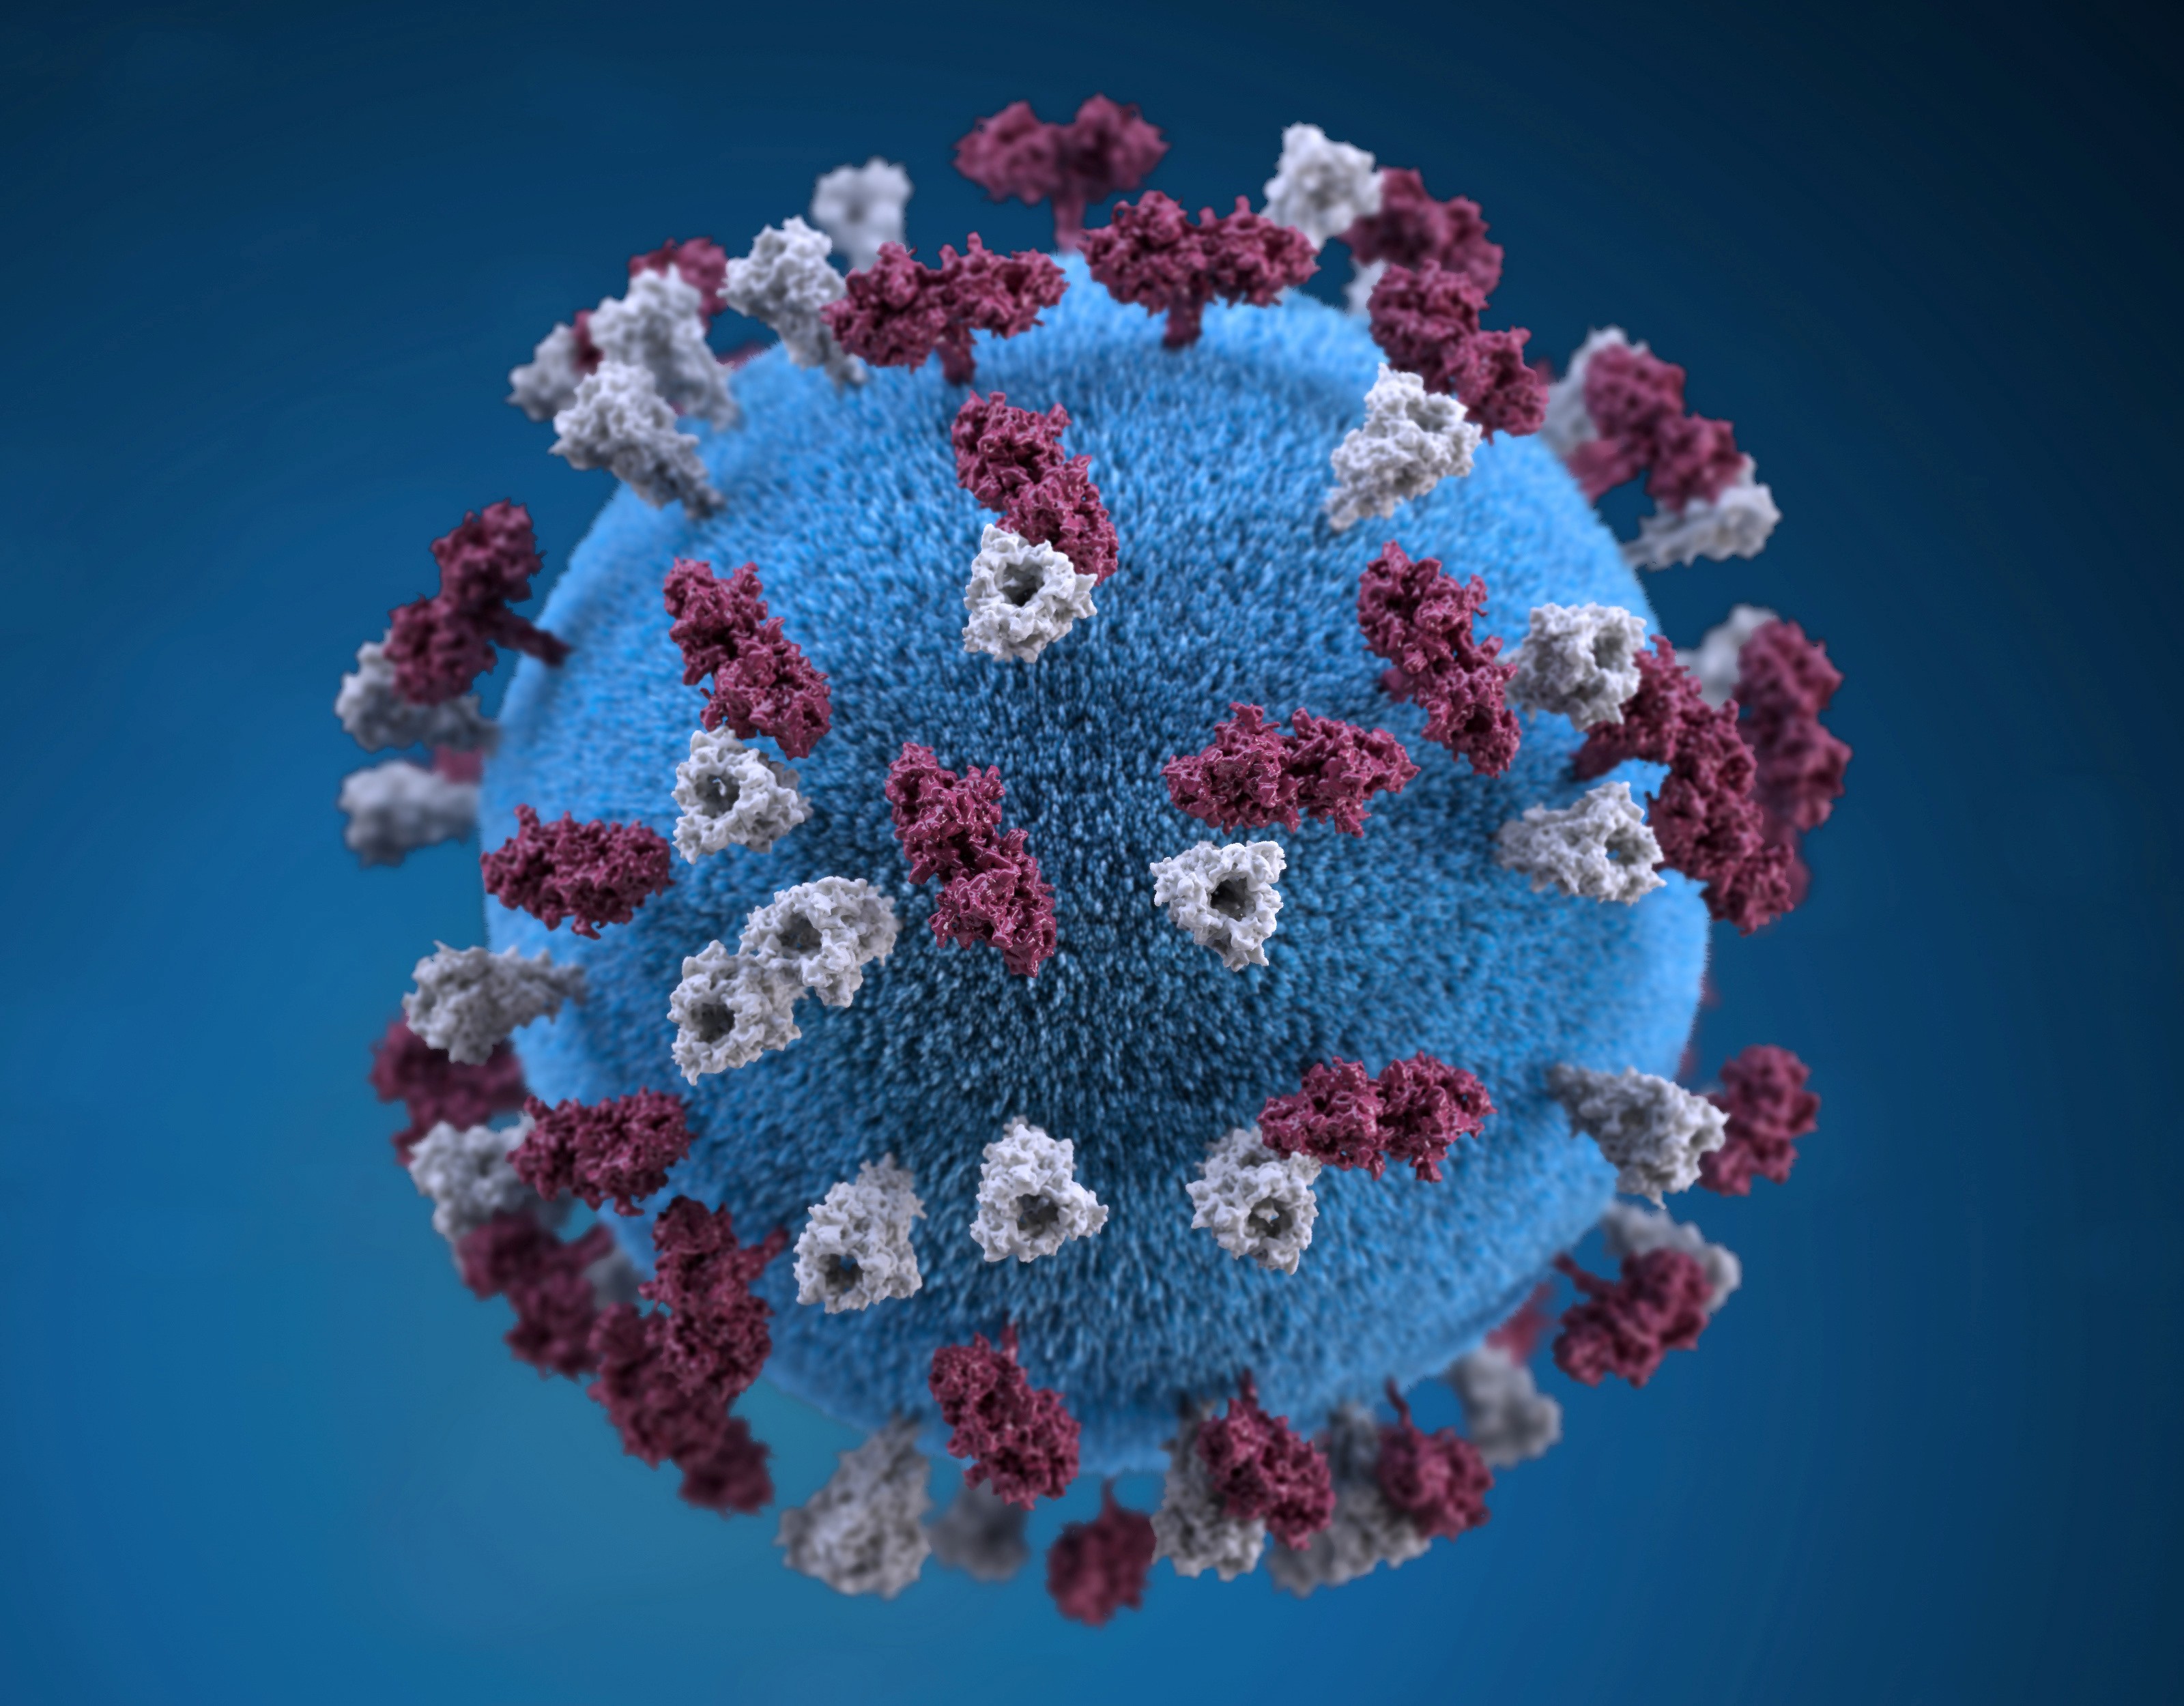 An illustration provides a 3D graphical representation of a spherical-shaped, measles virus particle studded with glycoprotein tubercles in this handout image obtained by Reuters April 9, 2019. Centers for Disease Control and Prevention (CDC)/Handout via REUTERS ATTENTION EDITORS - THIS IMAGE WAS PROVIDED BY A THIRD PARTY.